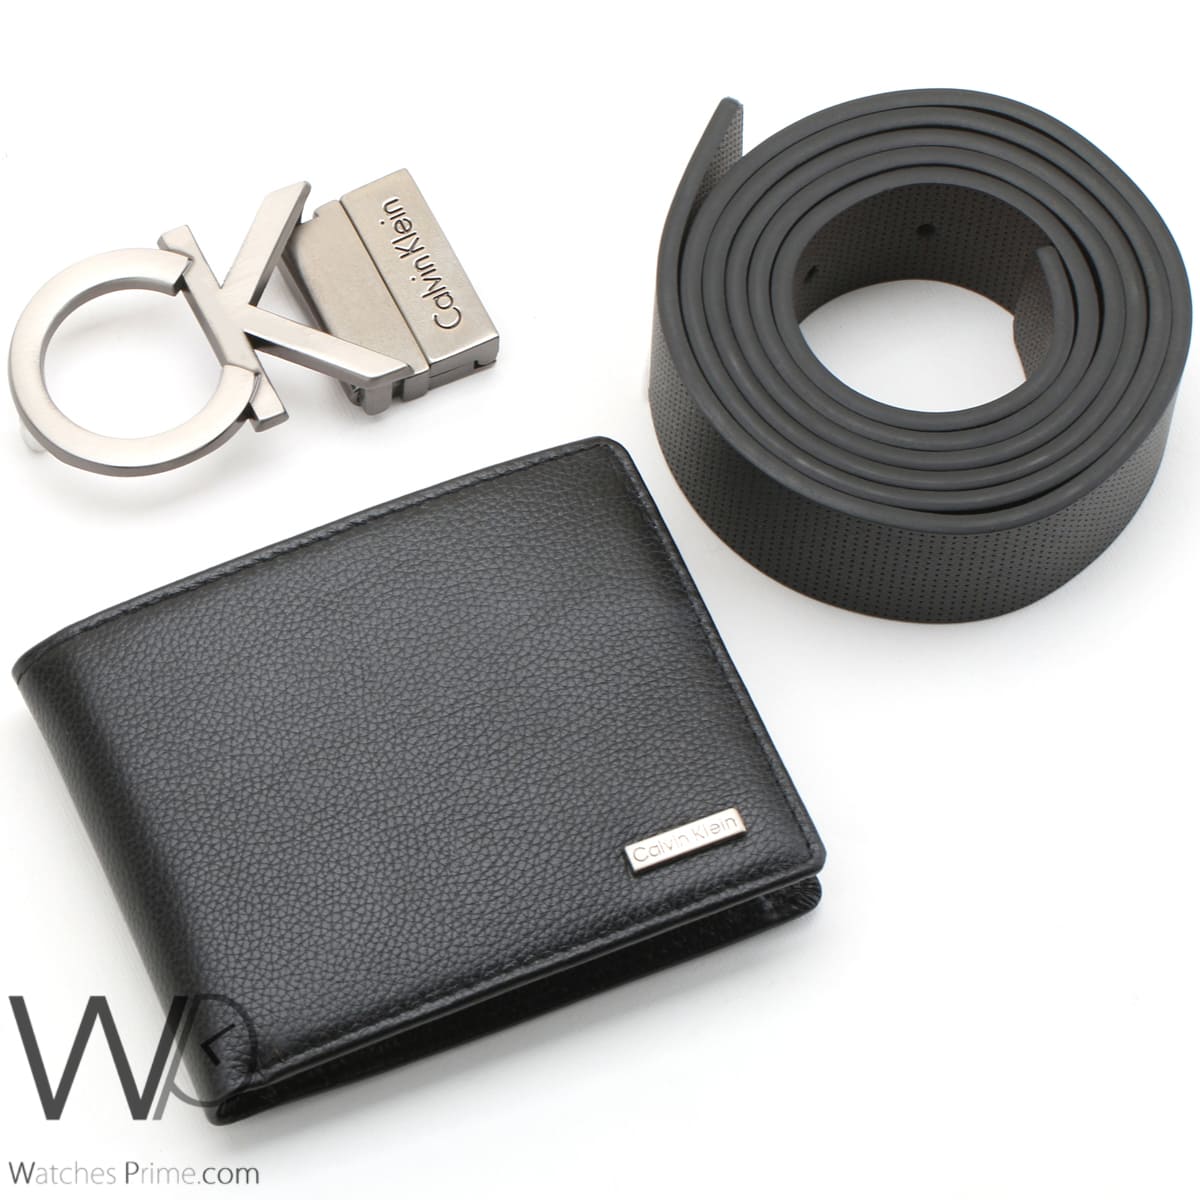 Calvin klein wallet and belt for men | Watches Prime